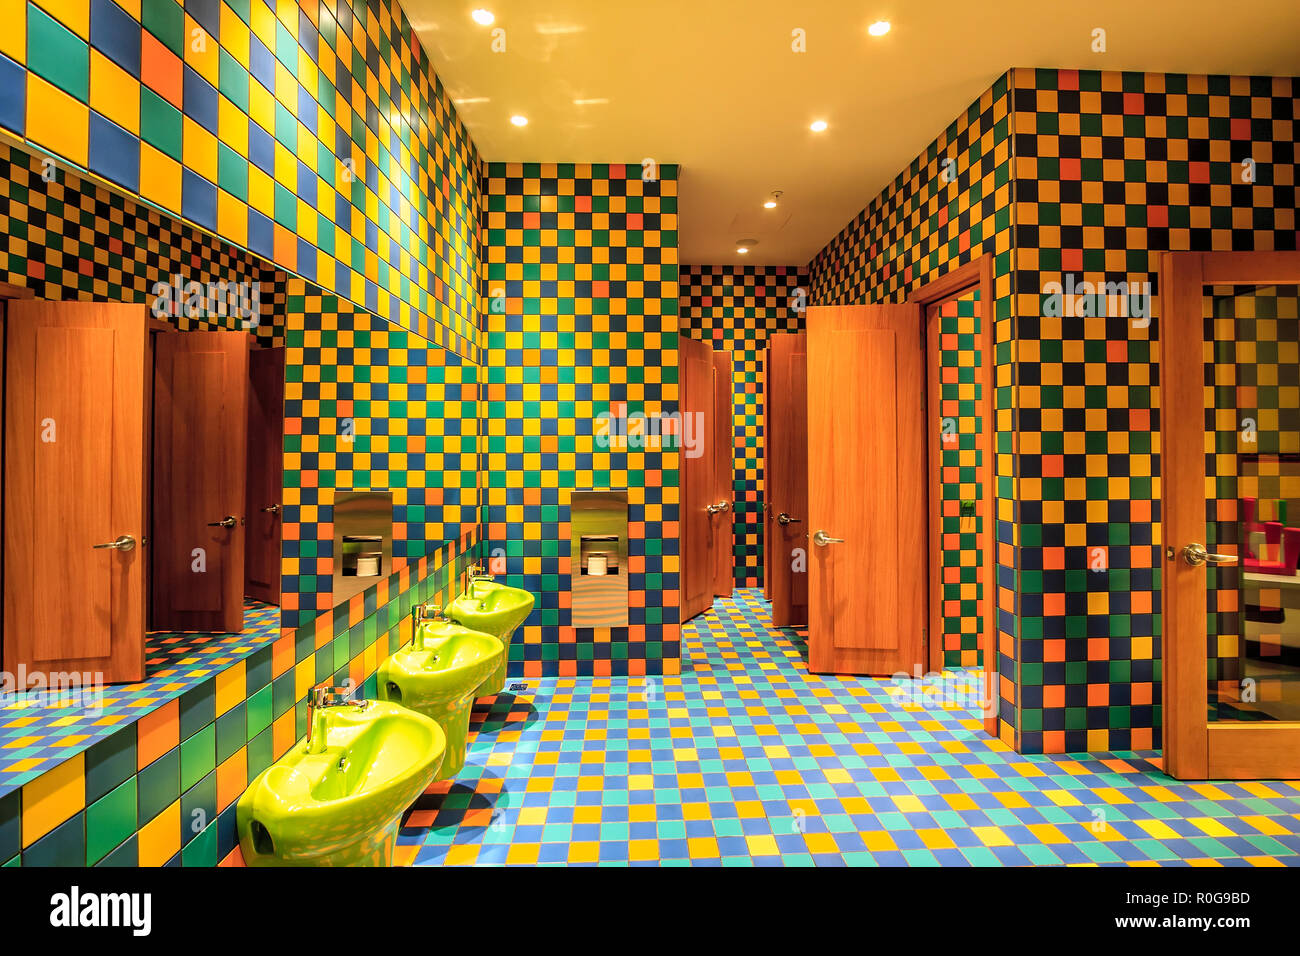 Sochi, Russia - March 5, 2014: Marriott Hotel children play room toilet with its colorful interior is performed in modern original stylish and kids fr Stock Photo